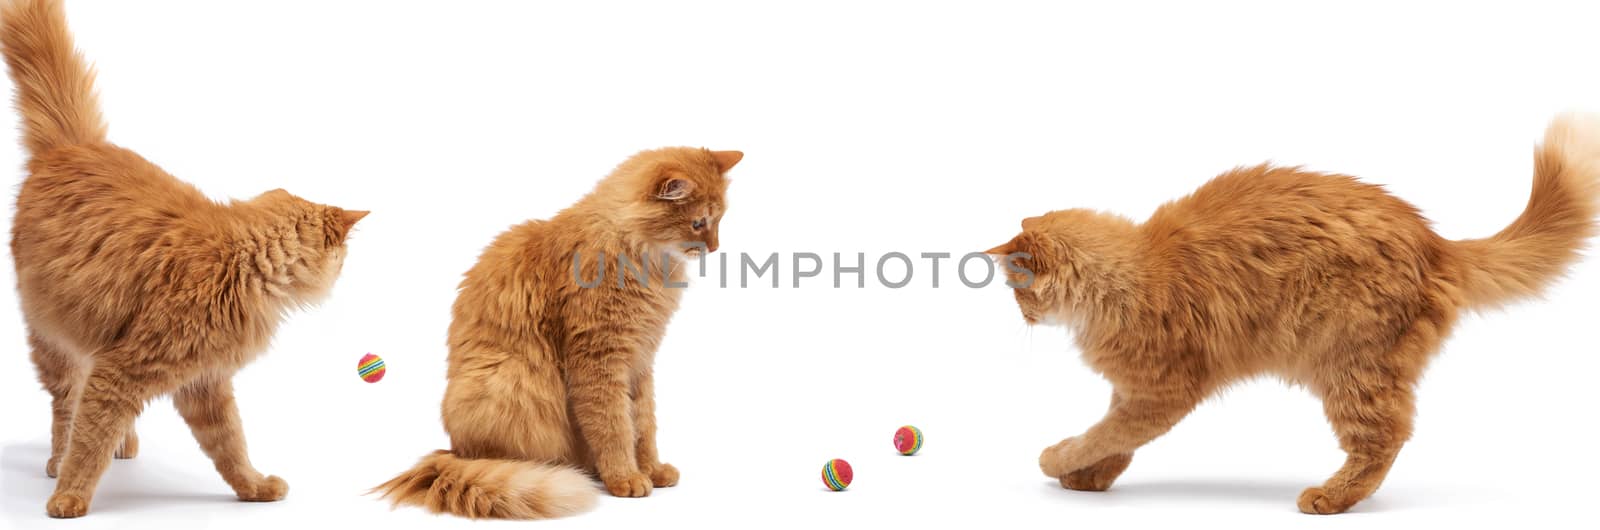 adult fluffy red cat plays with a red ball, cute animal isolated on a white background, set